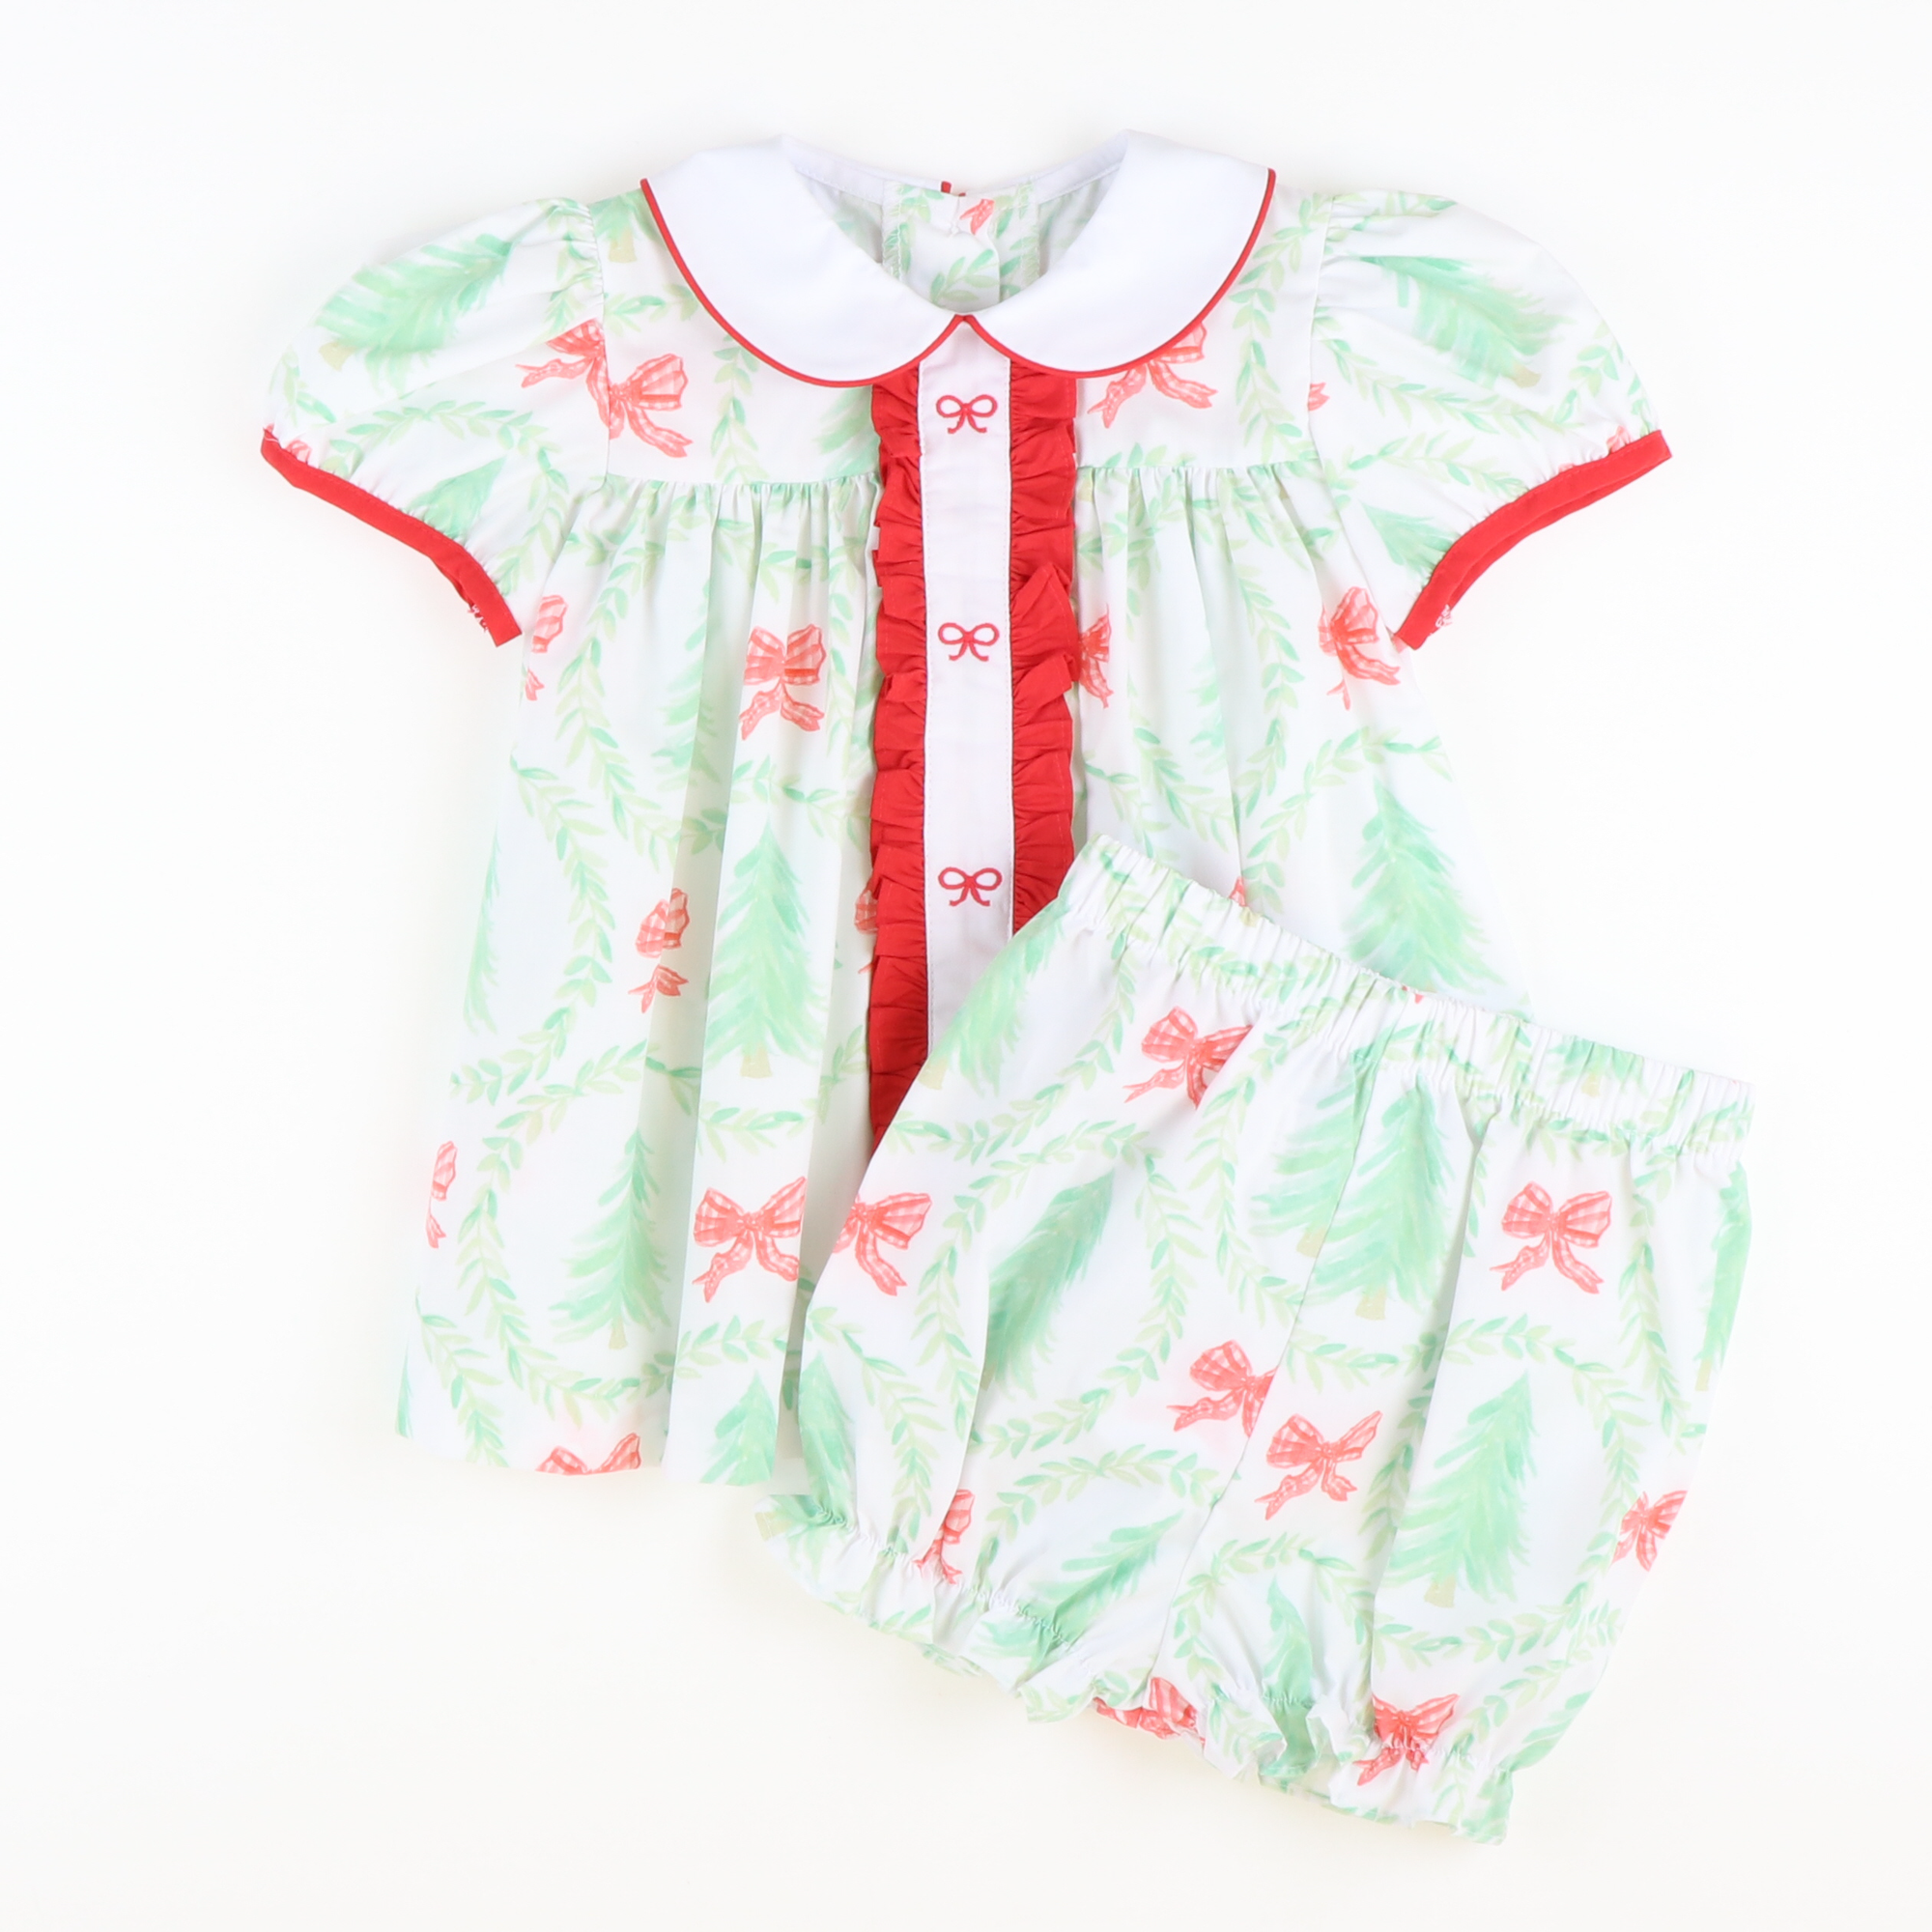 Embroidered Bows Collared Top & Bloomer Set- Heirloom Christmas Trees